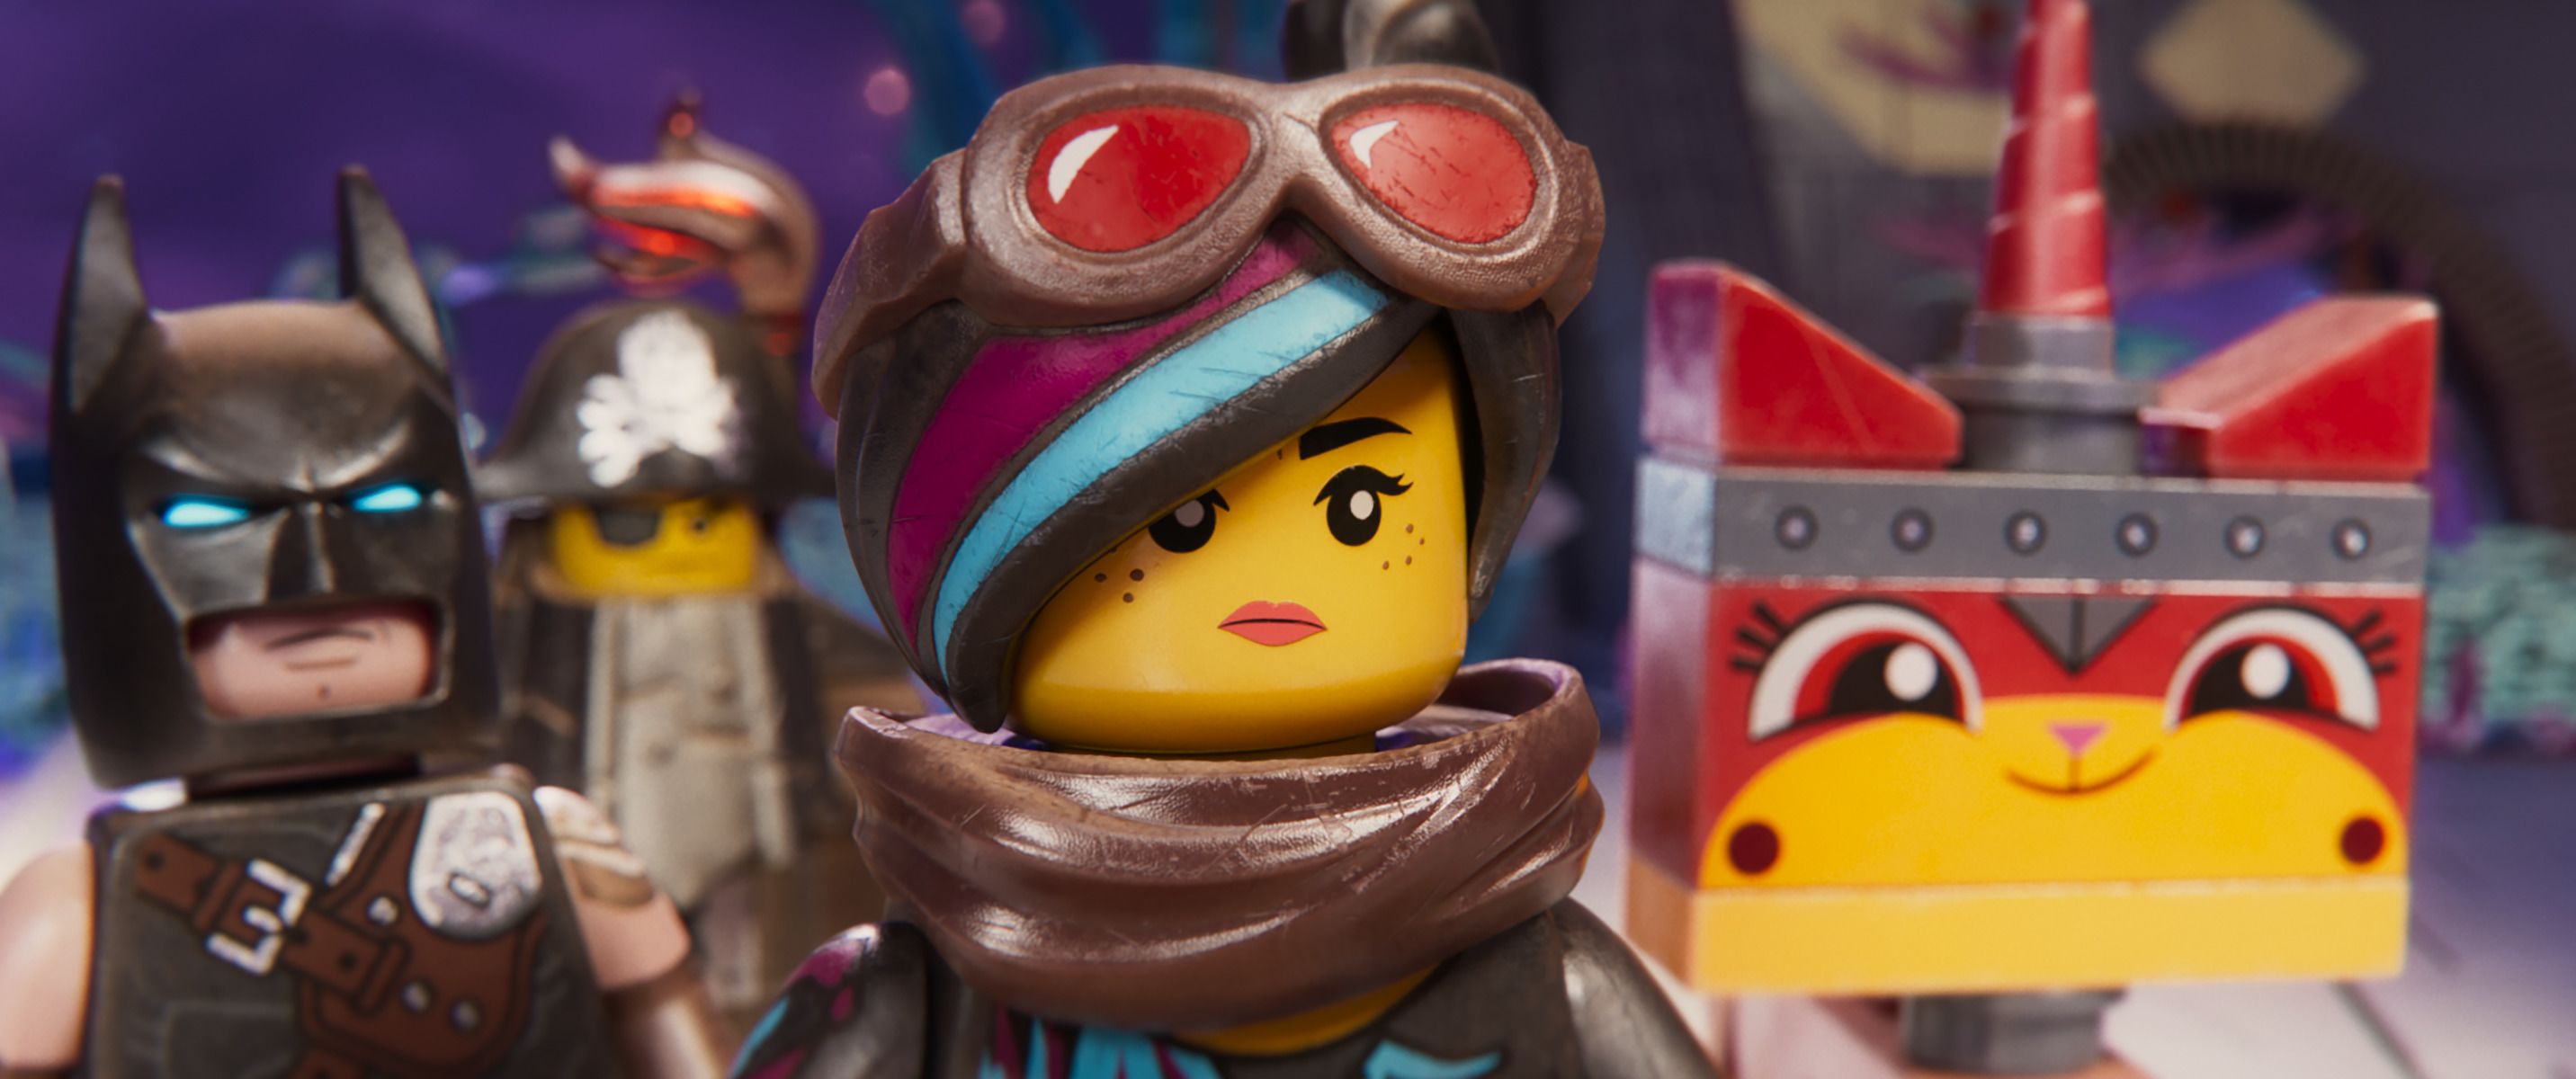 The Lego Movie review: Sequel doesn't hold together well as first | CNN